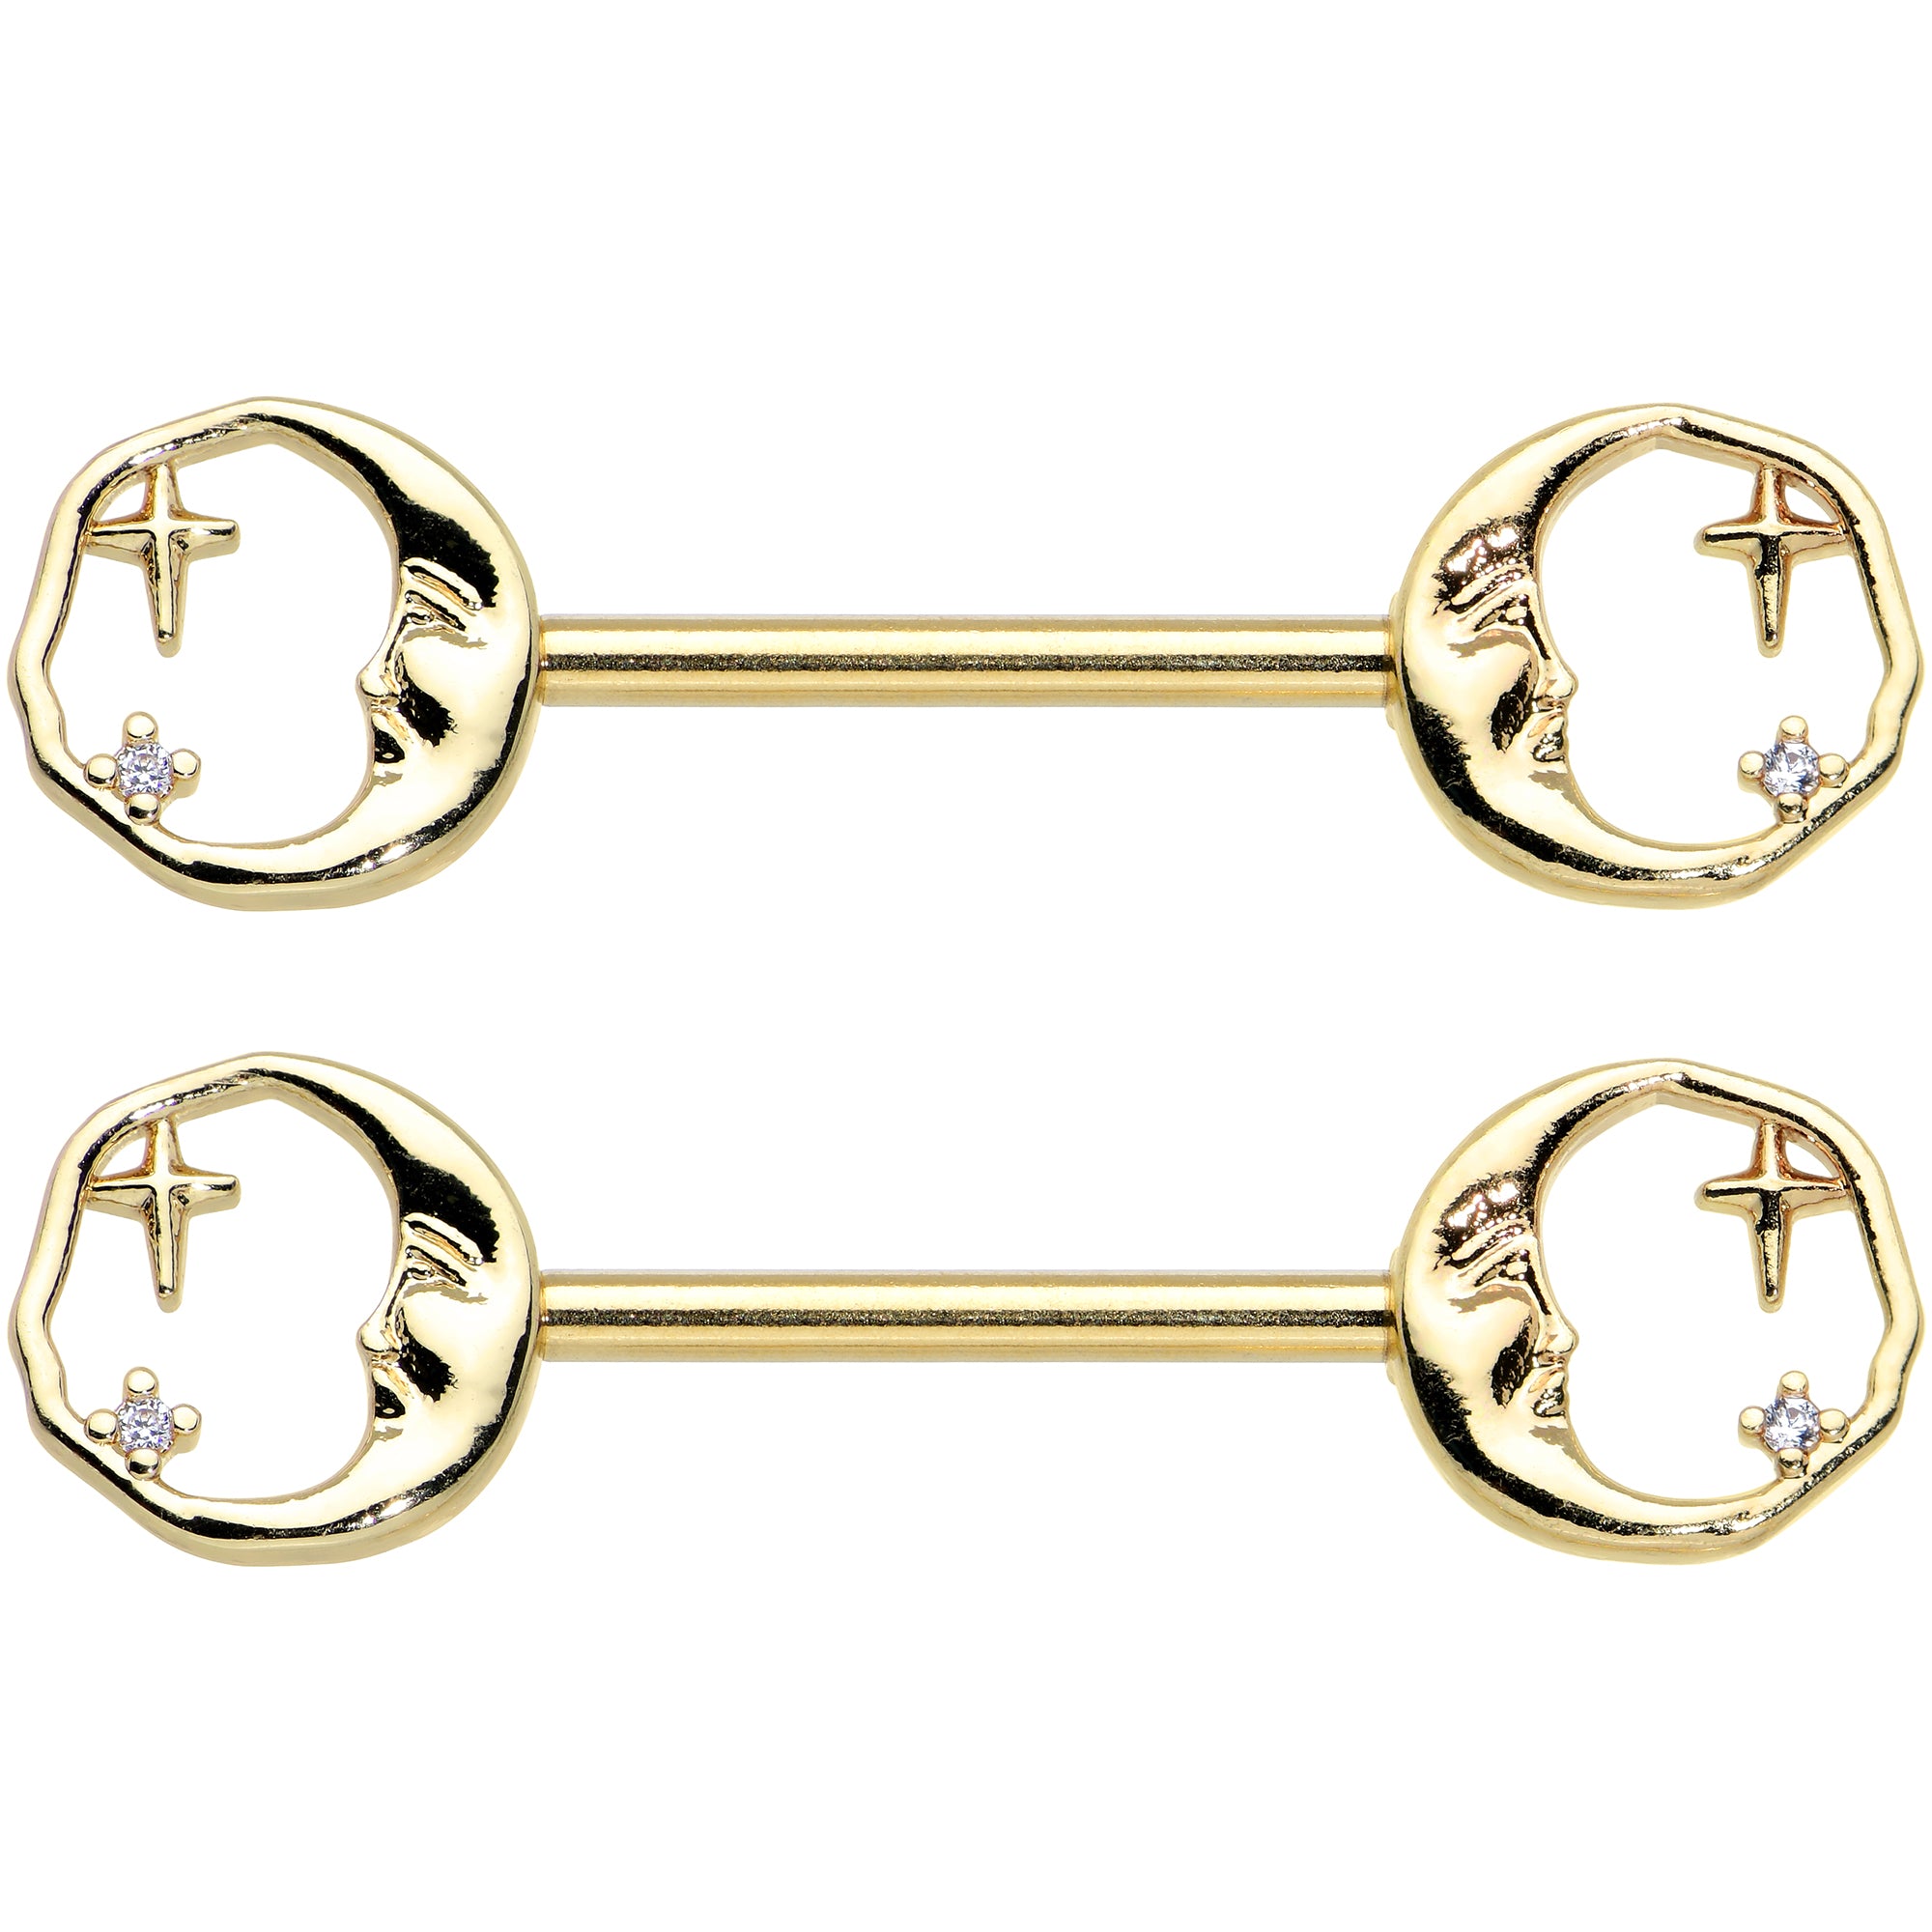 14 Gauge 9/16 Gold Tone Face Crescent Moon Barbell Nipple Ring Set